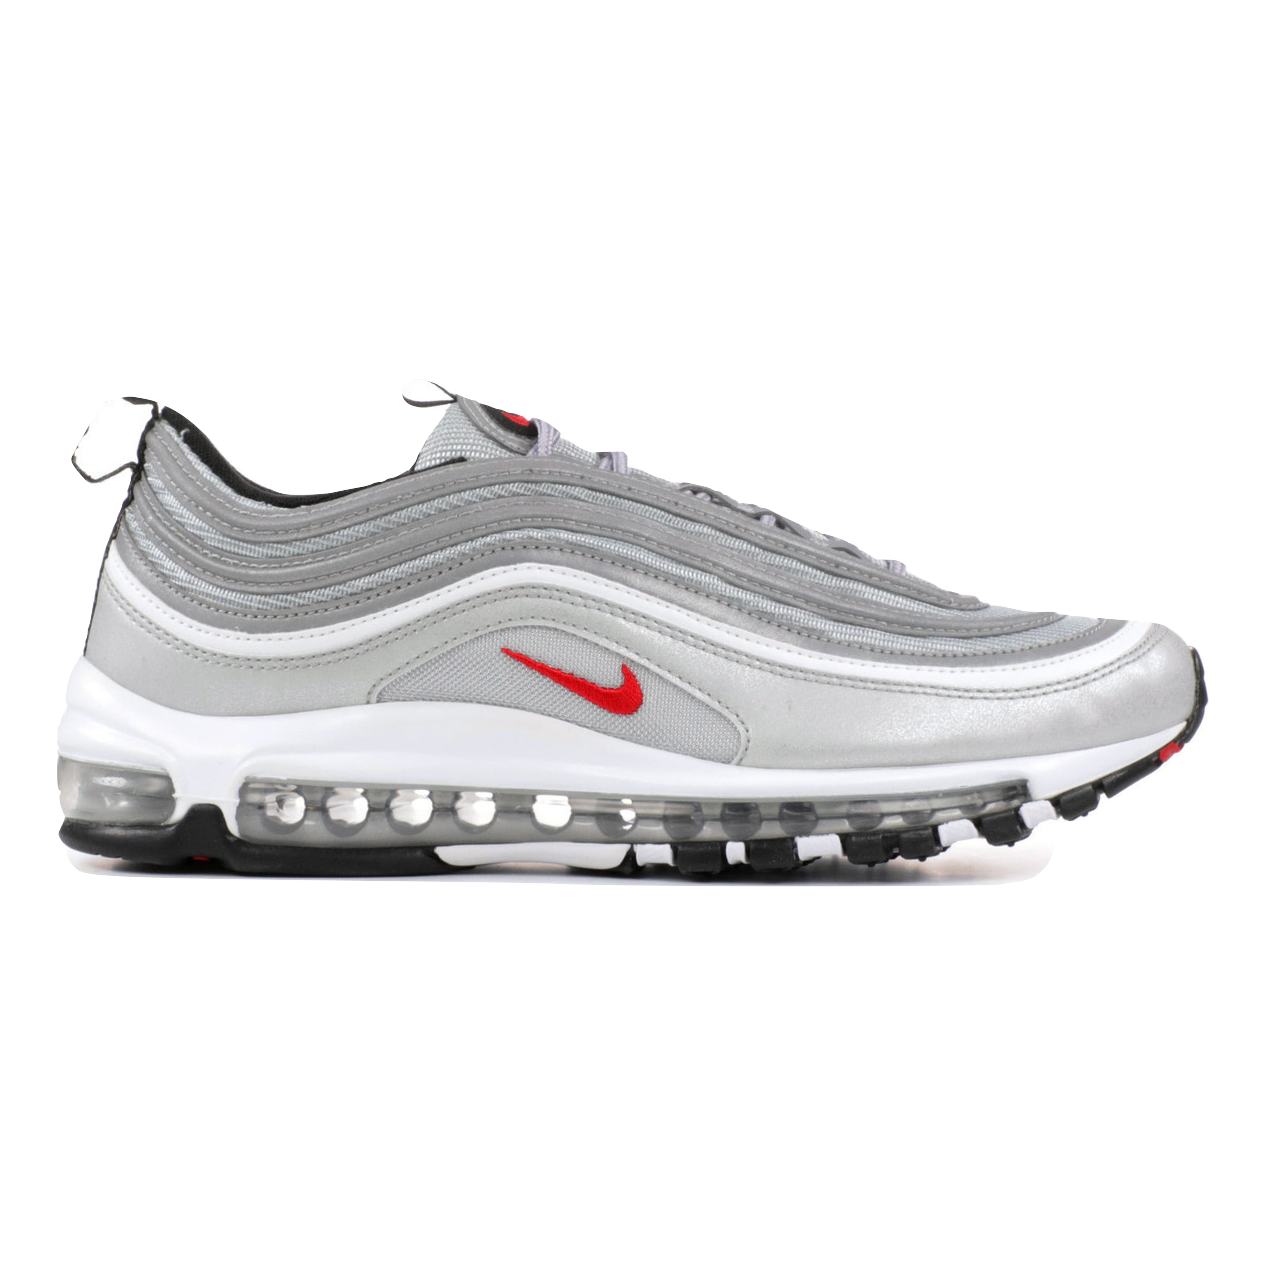 Nike Air Max 97 OG QS - Silver Bullet 2017 - Used